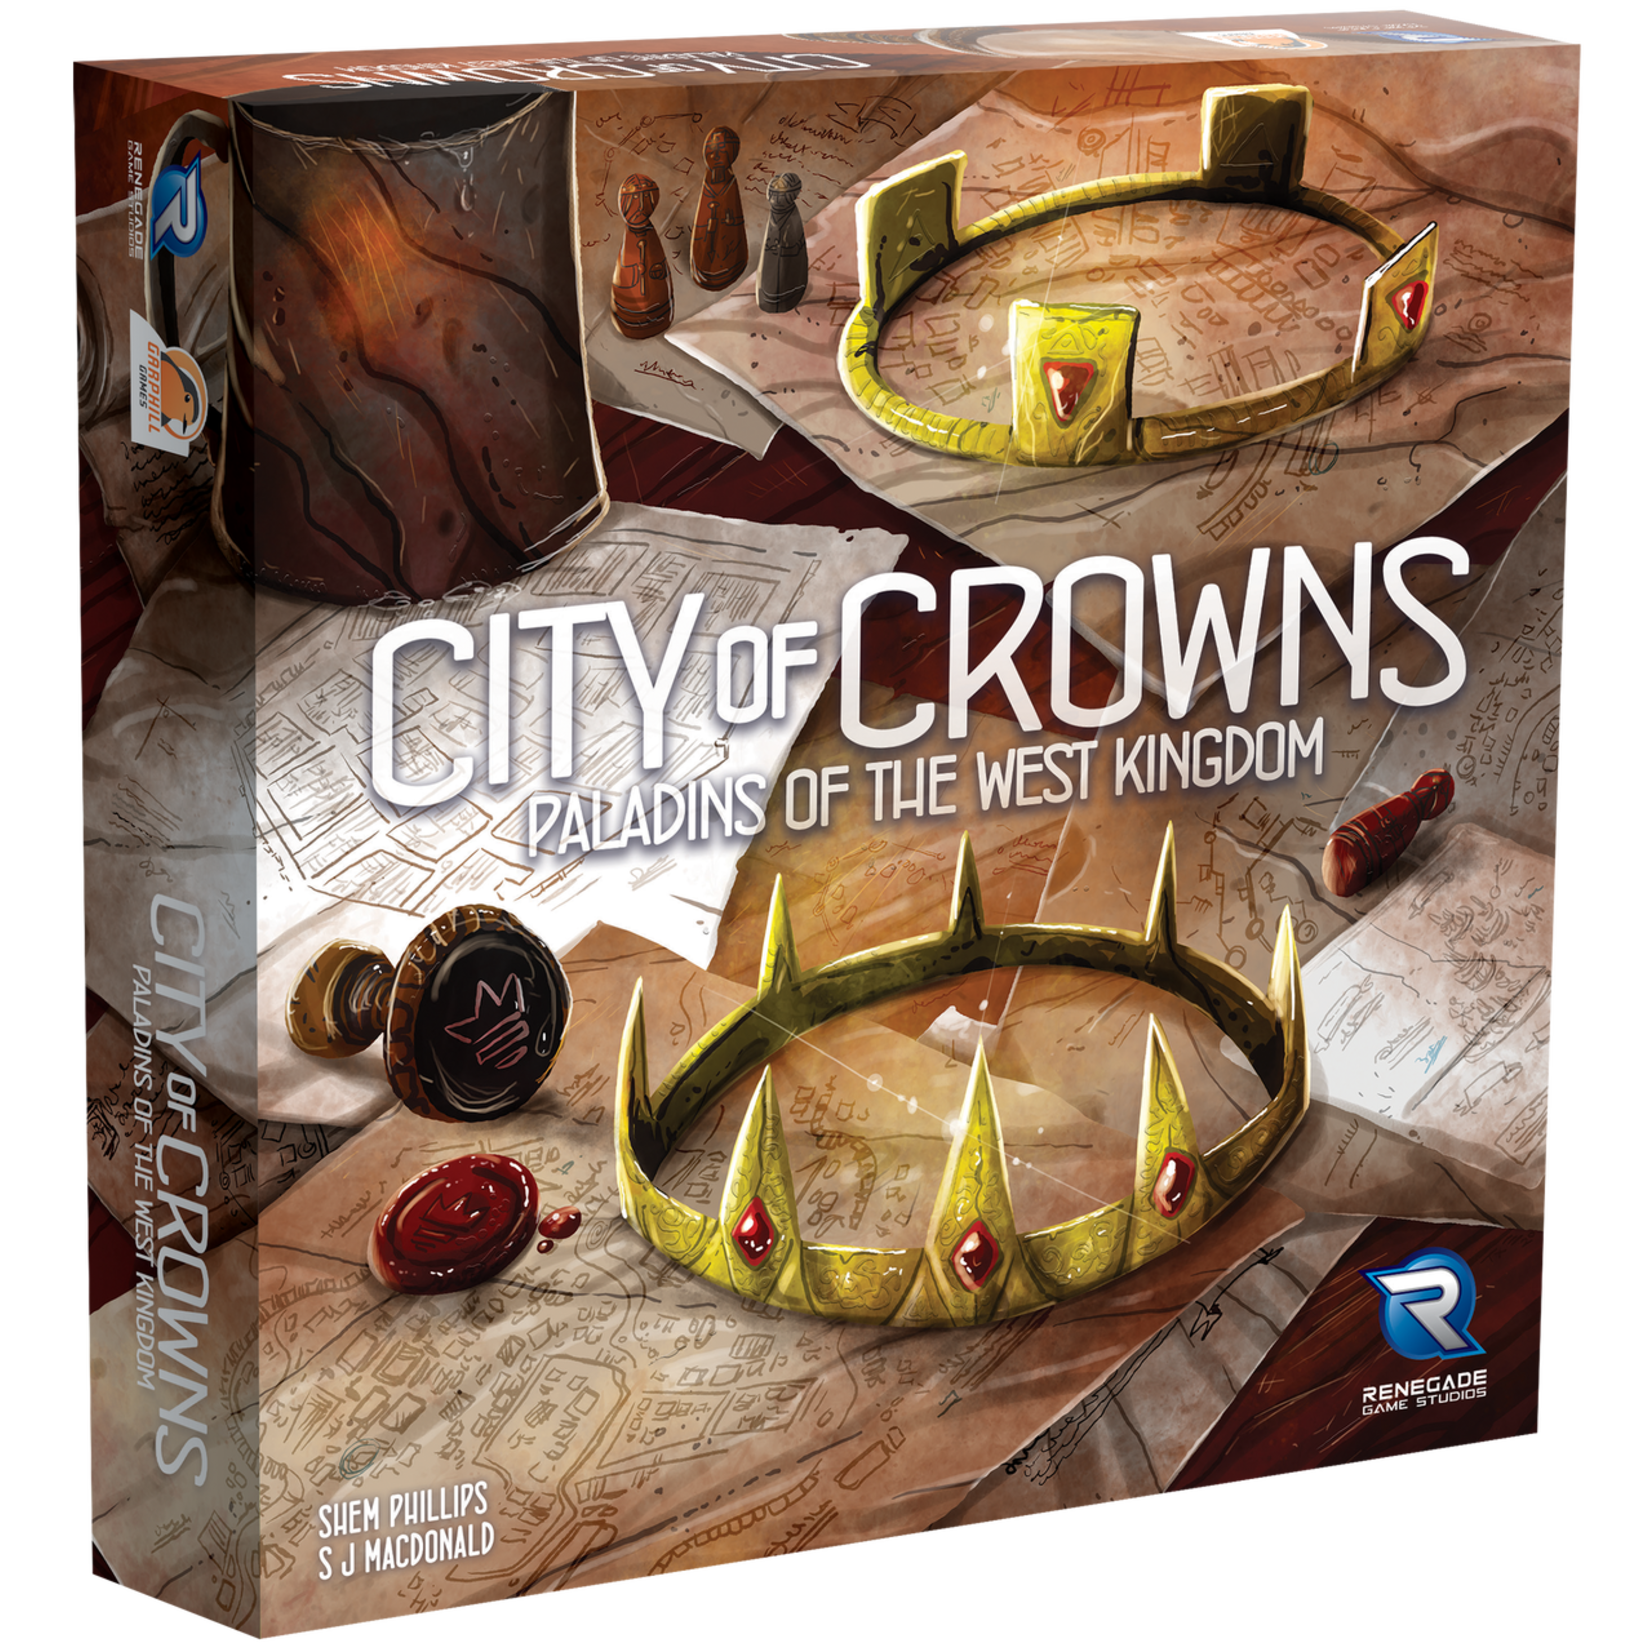 Renegade Games Studios West Kingdom, Paladins of the: City of Crowns